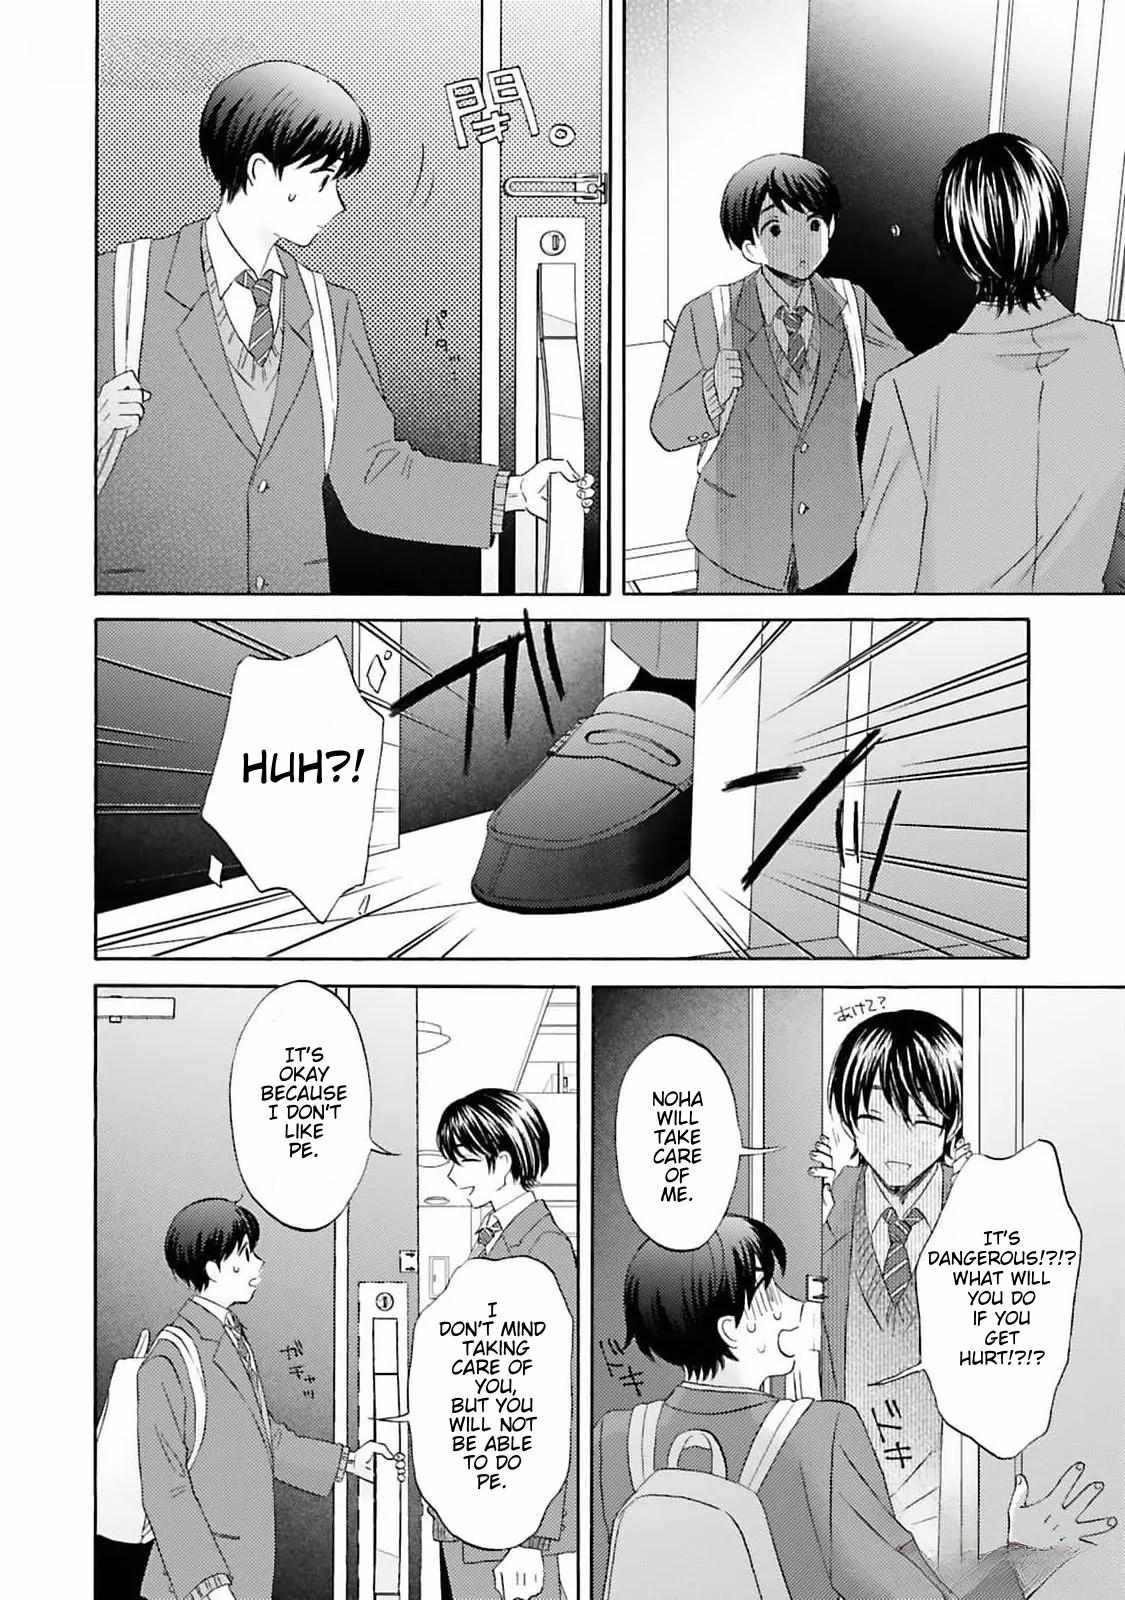 My Cutie Pie -An Ordinary Boy And His Gorgeous Childhood Friend- 〘Official〙 - 5 page 6-b017e99c